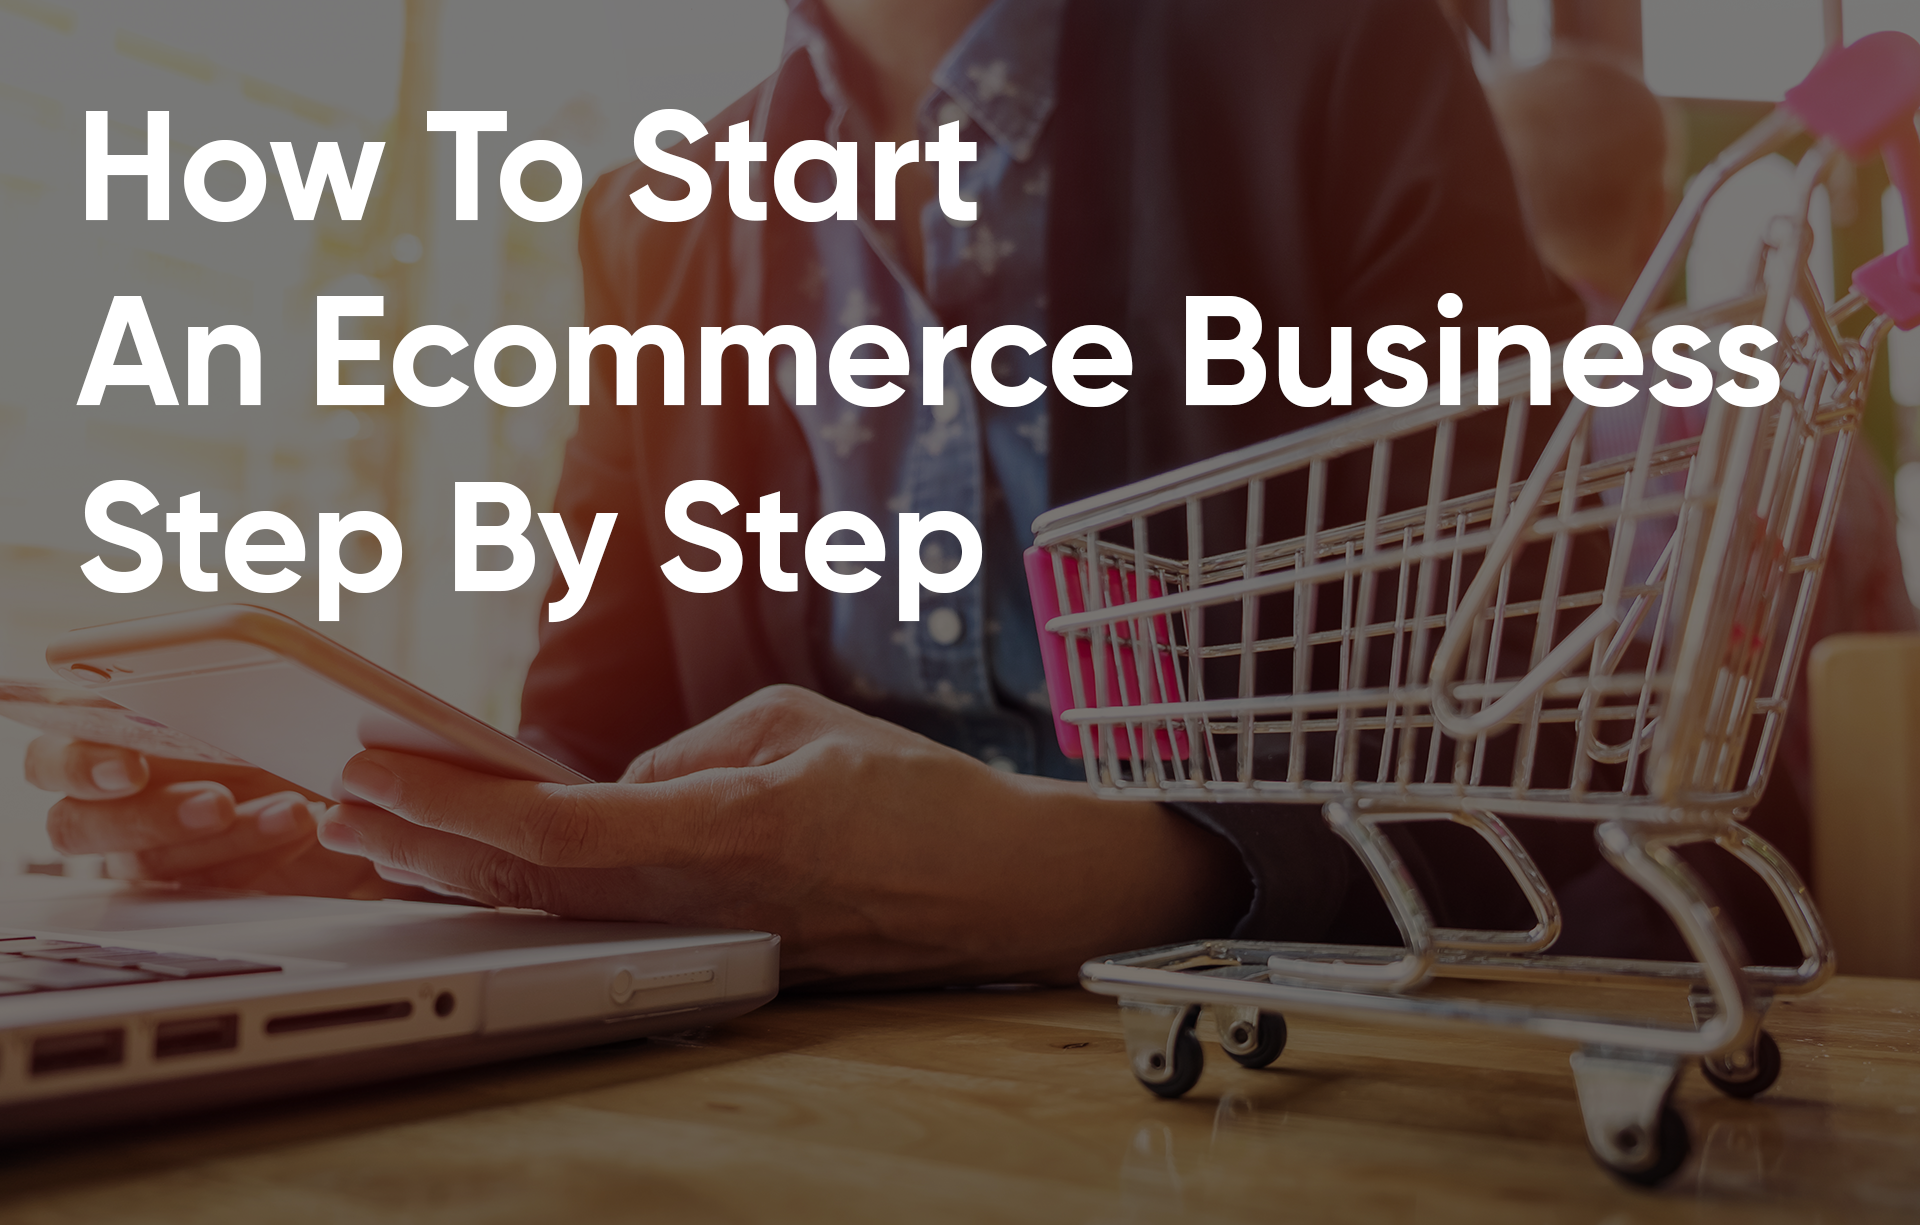 How-To-Start-An-Ecommerce-Business-Step-By-Step